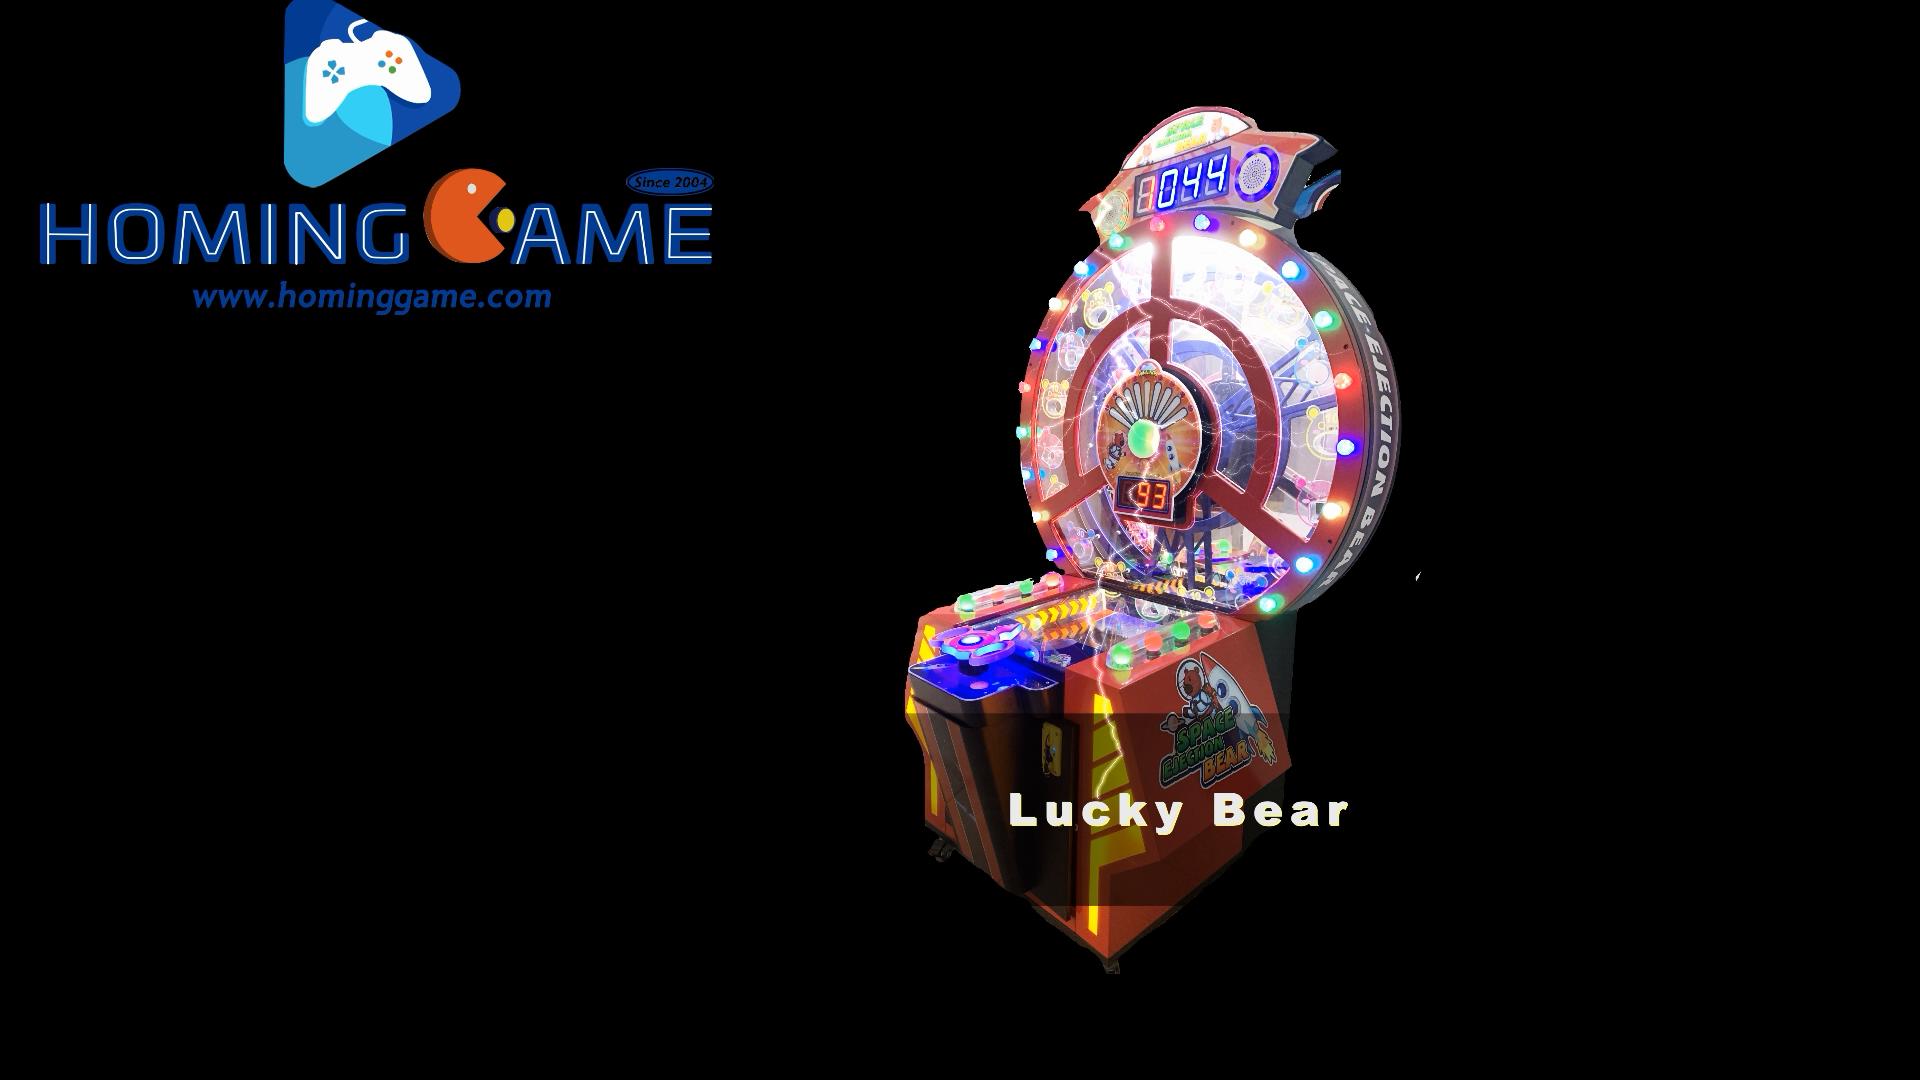 lottery game,lottery game machine,lucky bear shooting ball arcade game machine,lucky bear,lucky bear wheel redemption game machine,lucky bear wheel shooting ball lottery redemption game machine,game machine,arcade game machine,coin operated game machine,kids game machine,kids game,kids redemption game machine,children redemption game machine,kids arcade game machine,kids game equipment,amusement park  game equipment,amusement machine,games,entertainment game machine,family entertainment game machine,indoor game machine,electrical game machine,FEC game center game machine,hominggame,www.gametube.hk,amusement equipment,skill game machine,skill redemption game machine,coin operated redemption game machine,coin operated lottery game machine